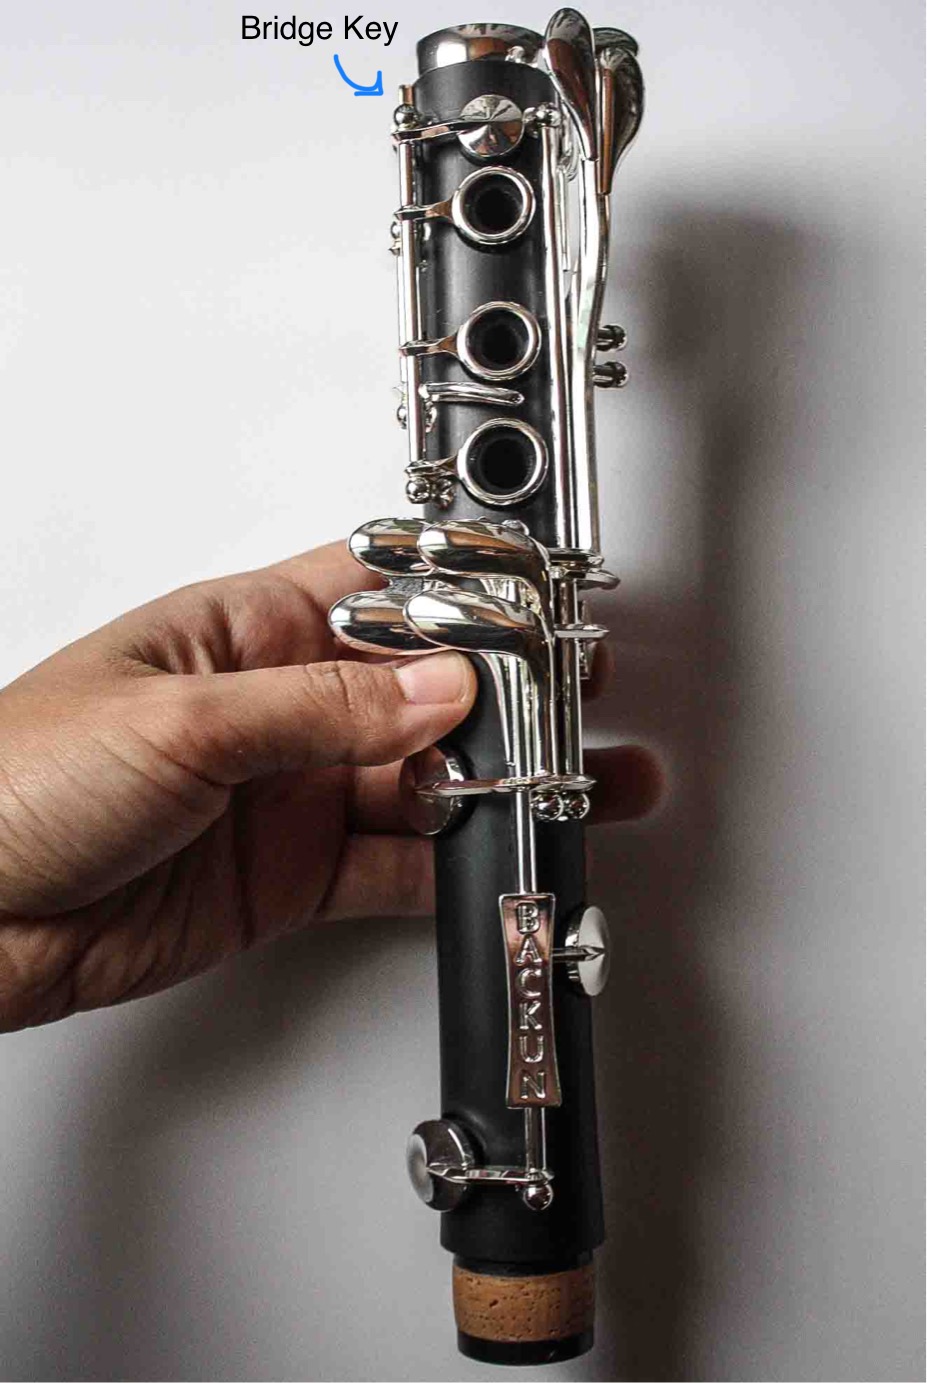 The lower joint of the clarinet